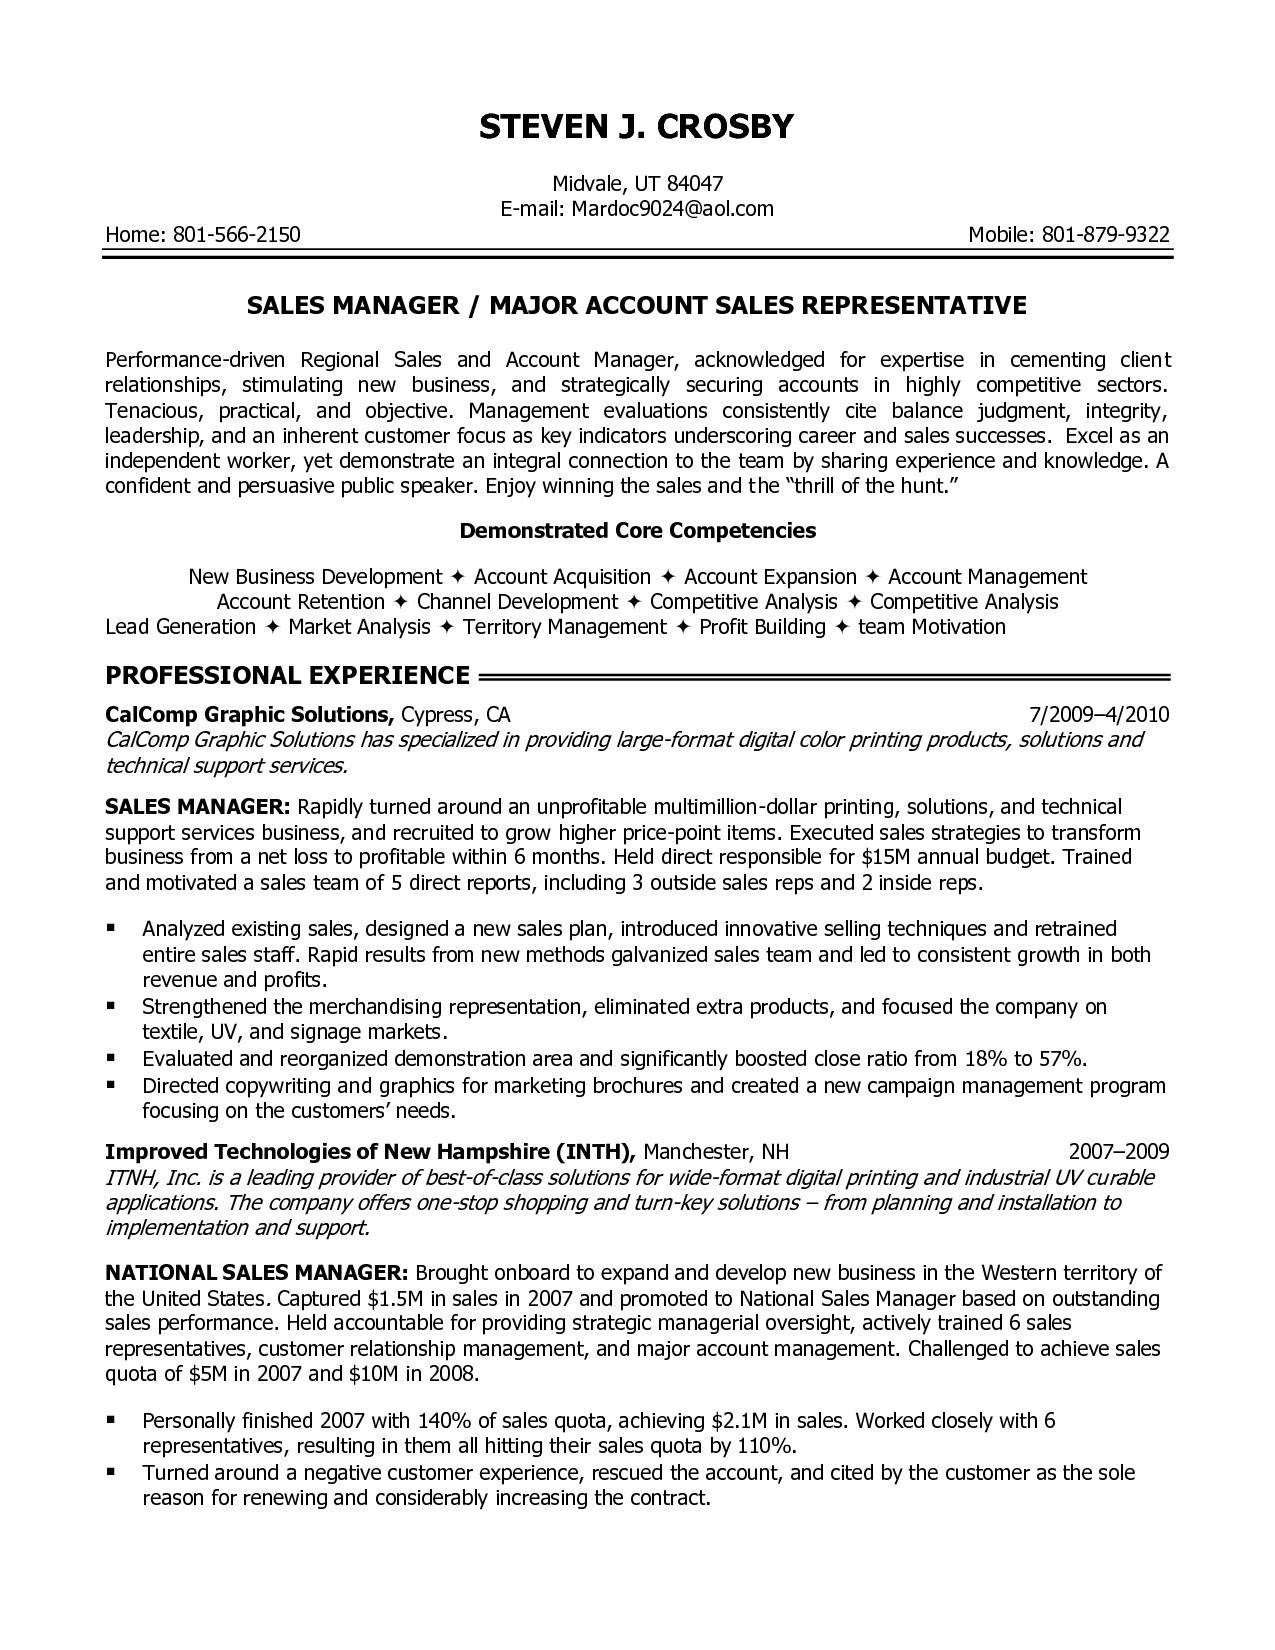 General Objective For Resume Great Objectives For Resumes Sample New General Resume Objective Resume Examples Pdf Best Resume Pdf 0d Of Great Objectives For Resumes general objective for resume|wikiresume.com